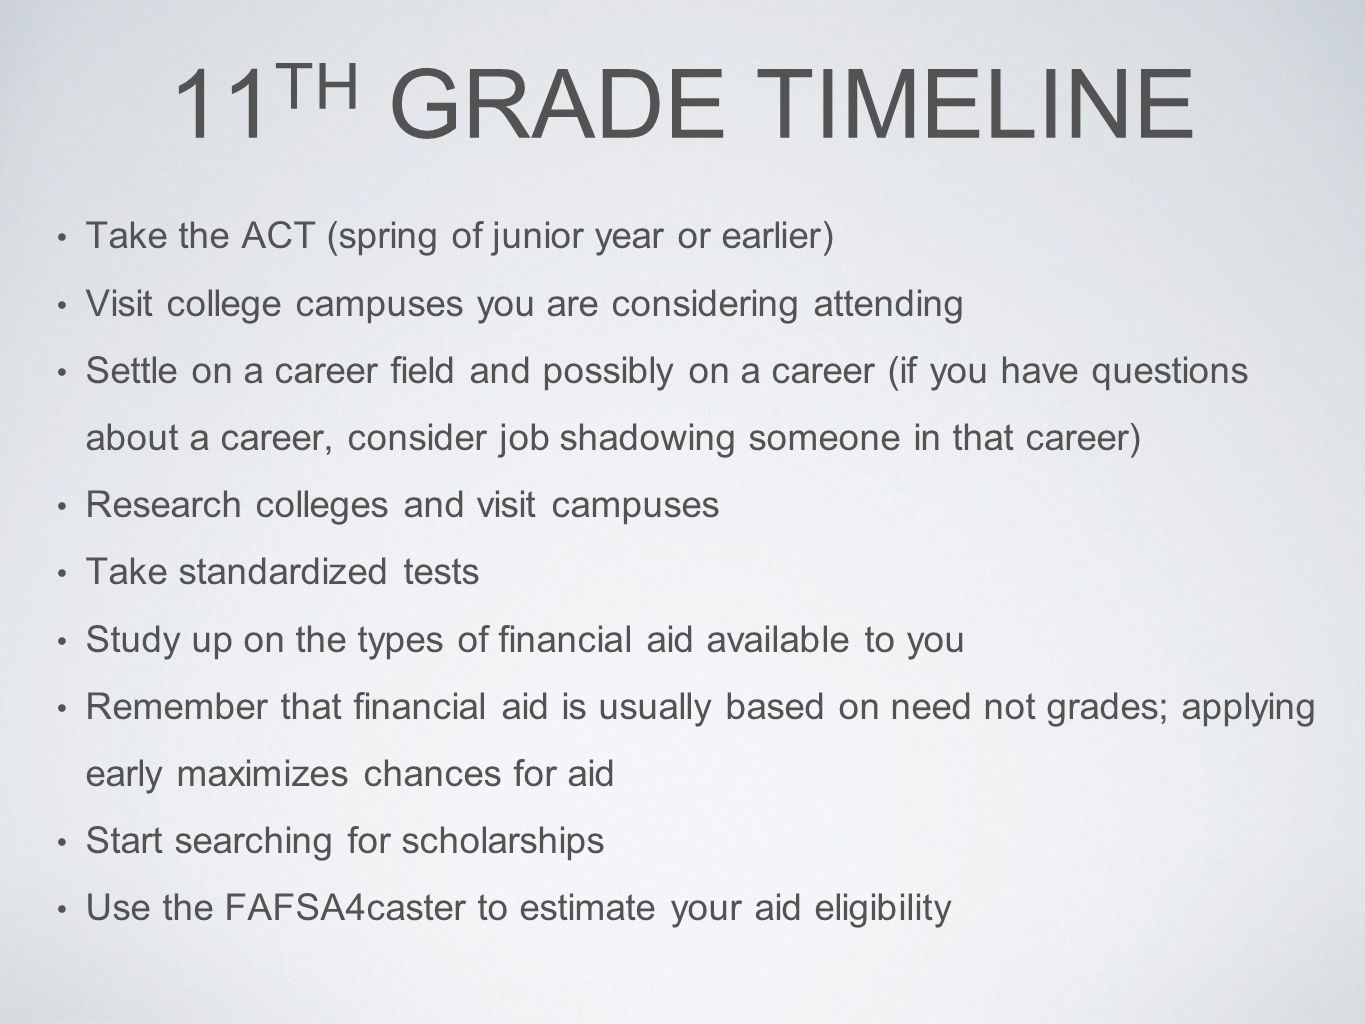 11 TH GRADE TIMELINE Take the ACT (spring of junior year or earlier) Visit college campuses you are considering attending Settle on a career field and possibly on a career (if you have questions about a career, consider job shadowing someone in that career) Research colleges and visit campuses Take standardized tests Study up on the types of financial aid available to you Remember that financial aid is usually based on need not grades; applying early maximizes chances for aid Start searching for scholarships Use the FAFSA4caster to estimate your aid eligibility